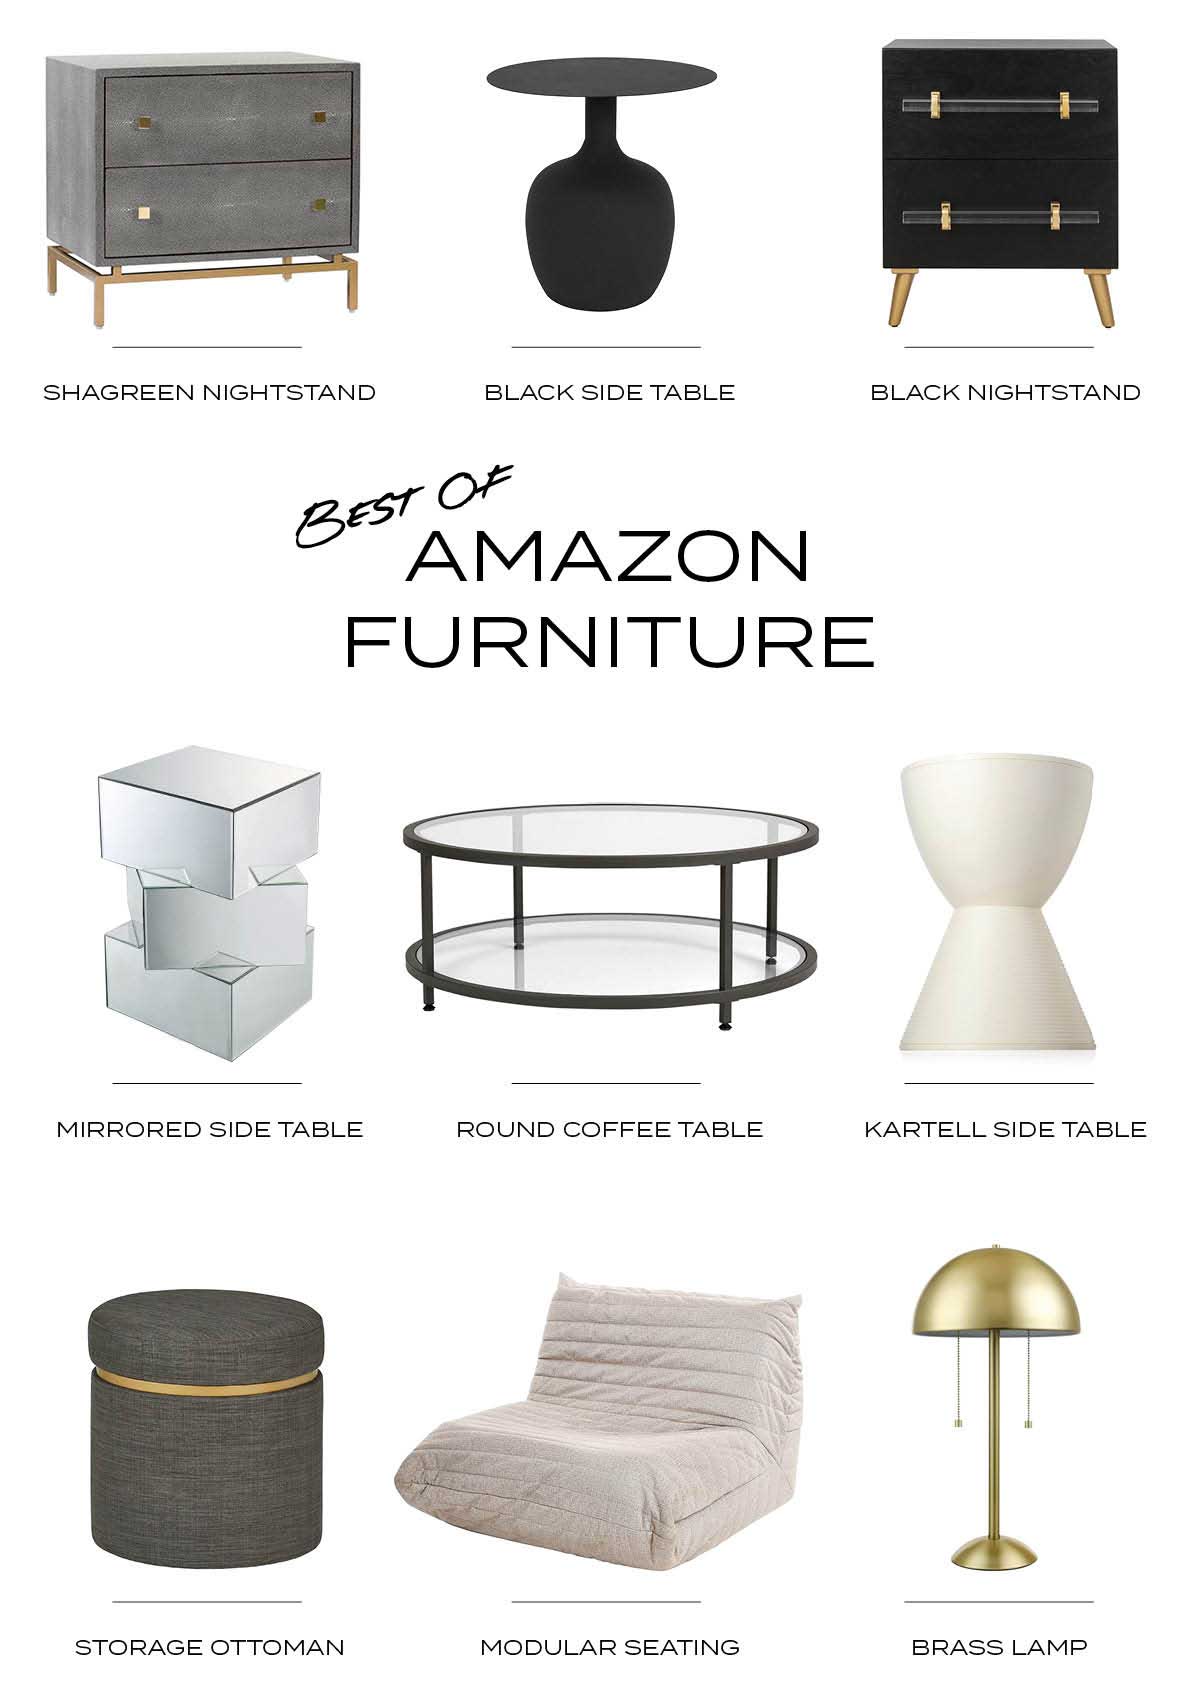 Best Of Amazon Home Decor curated by an interior designer